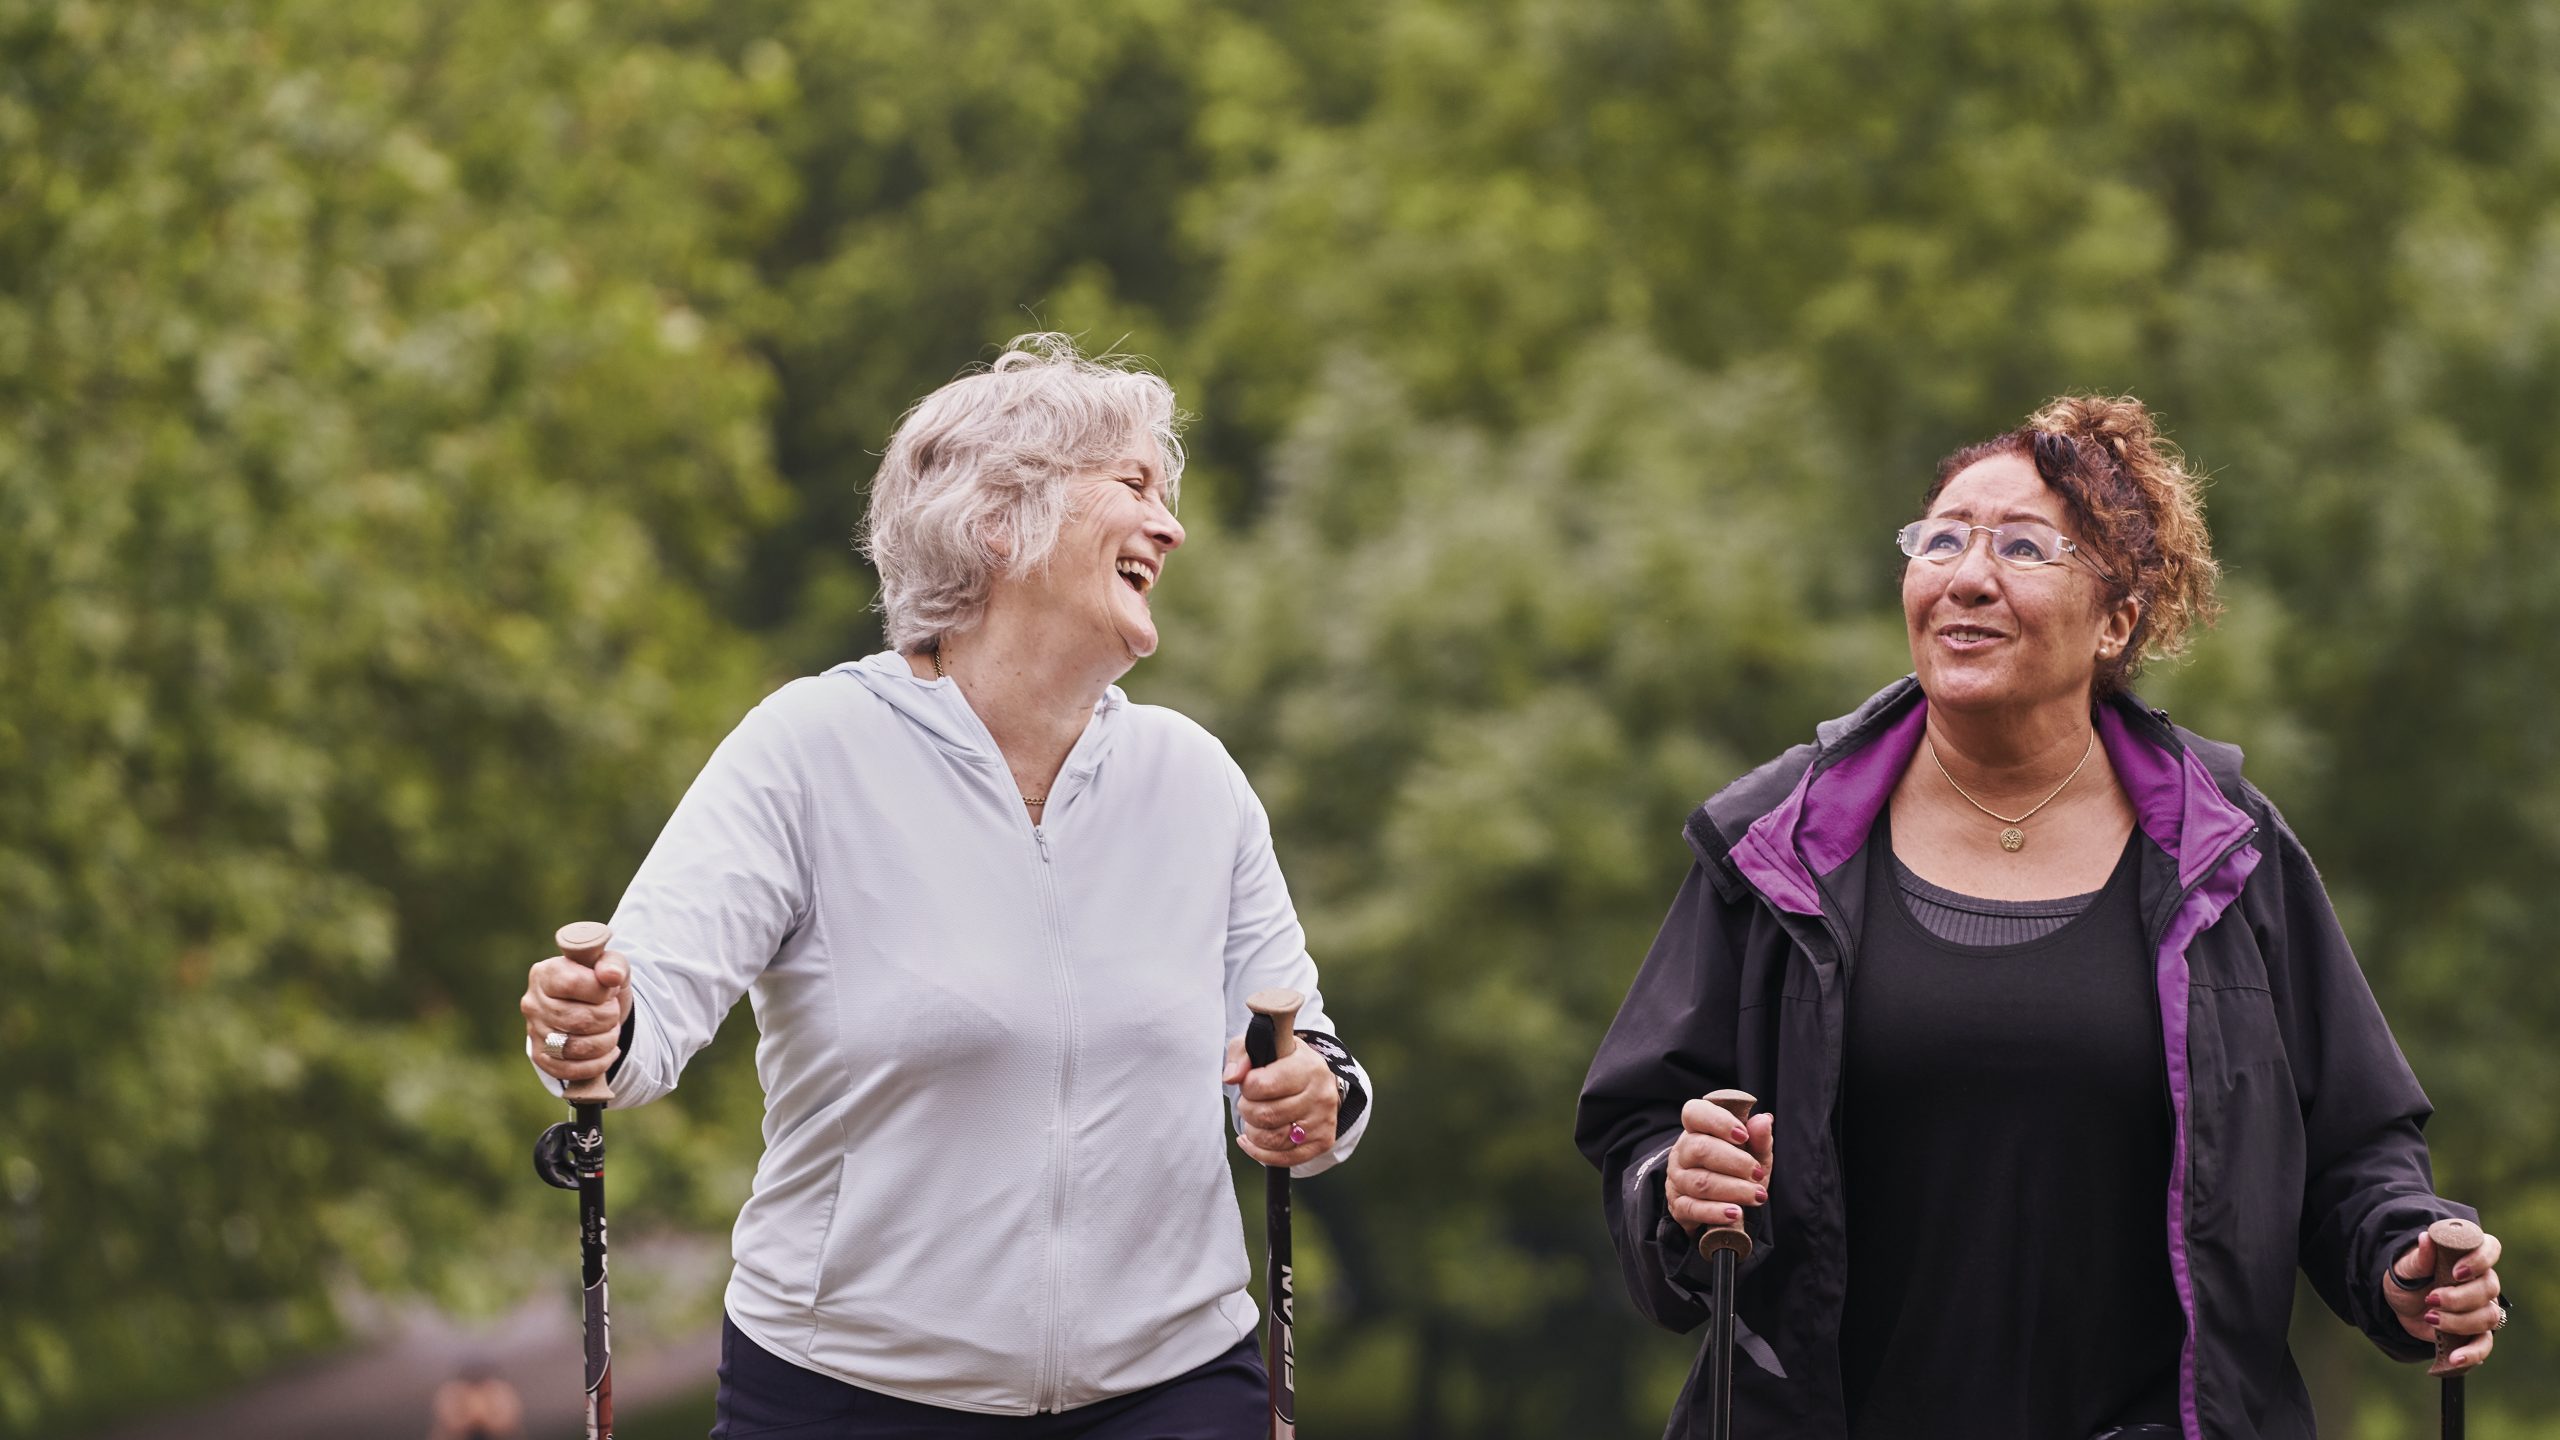 Two women aged 55-70 walking in the park